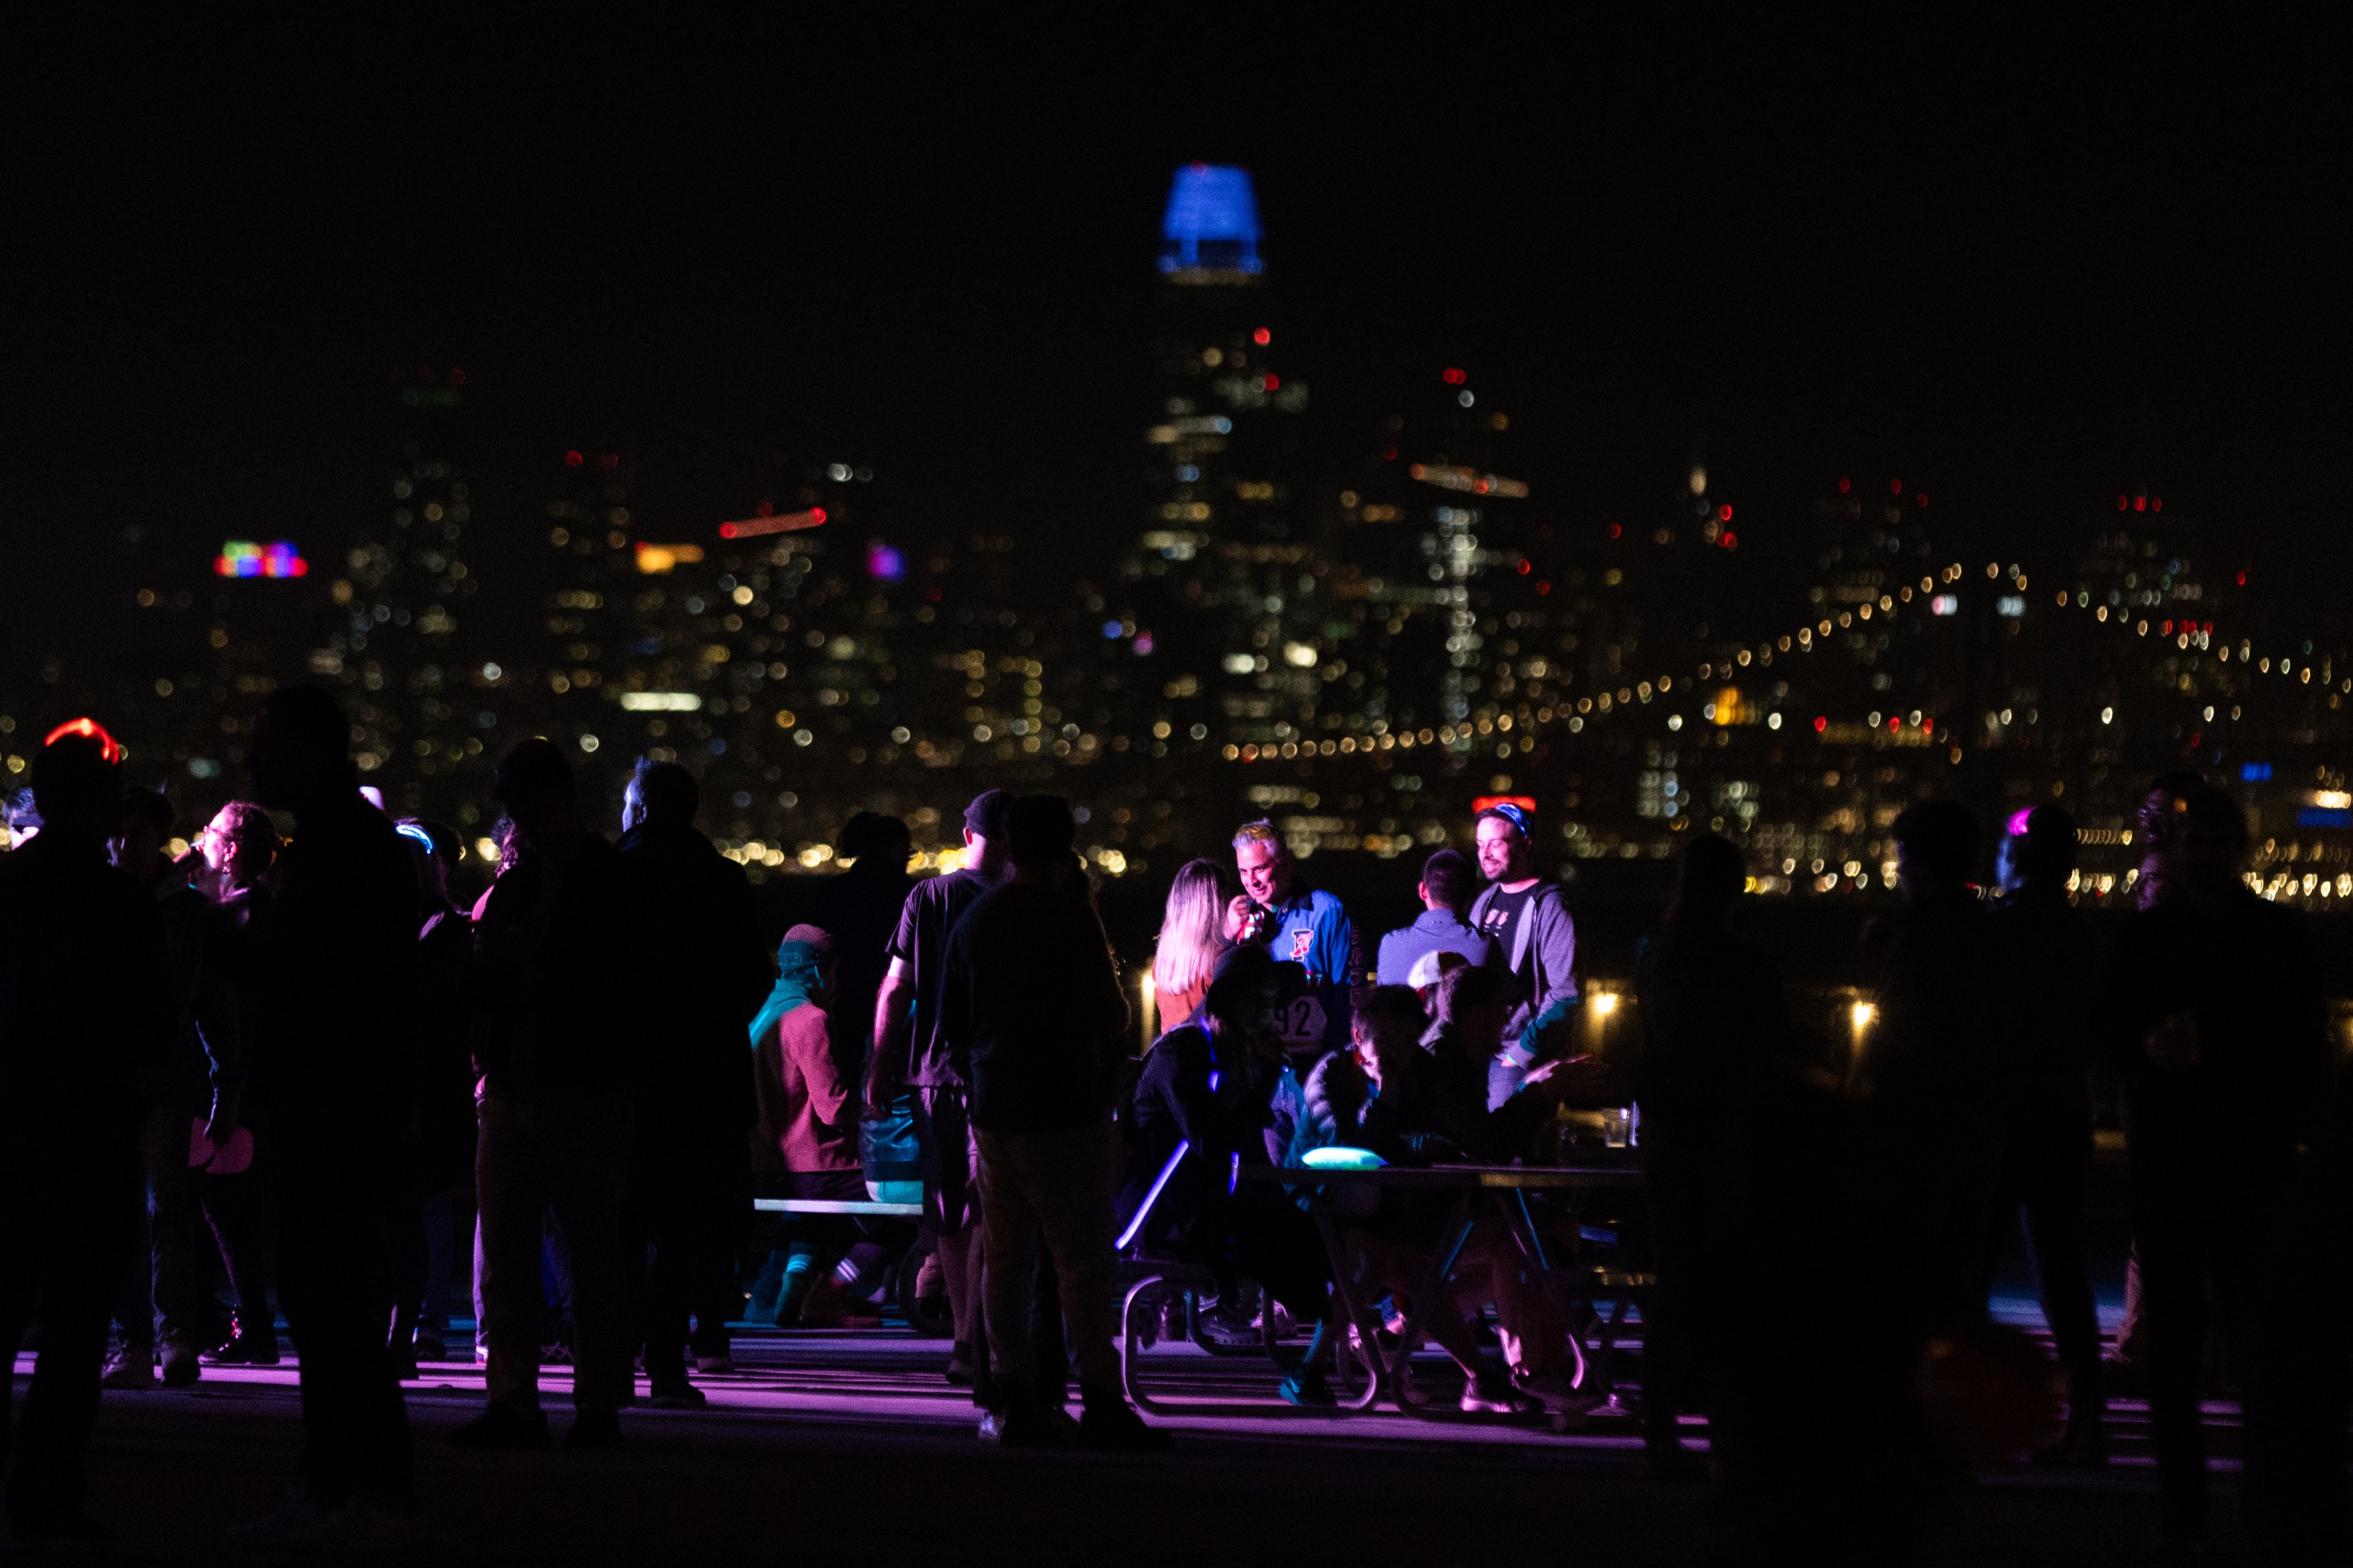 A group of people are socializing at night, partially illuminated by colored lights. The background features a vibrant, glowing city skyline with a visible bridge.